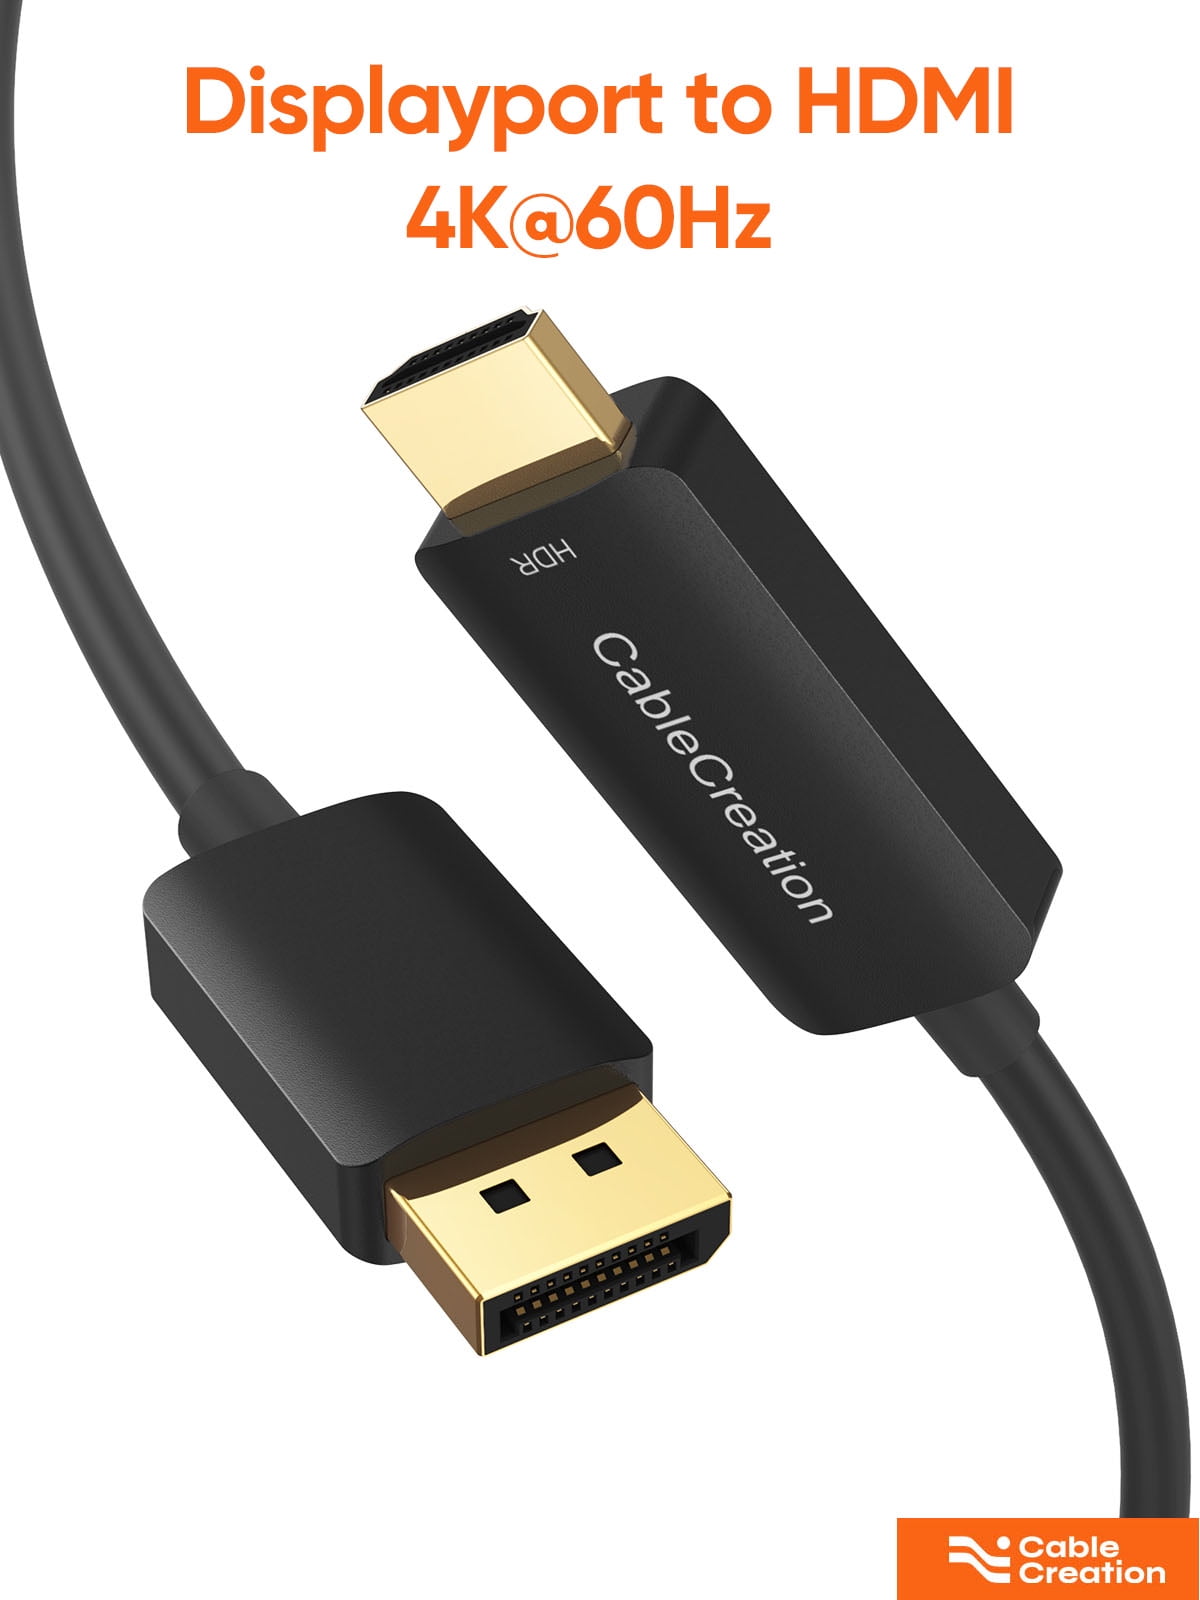 2Pack--Active to HDMI Cable 8ft, CableCreation Unidirectional DisplayPort 1.4 to HDMI Monitor Cable 4K@60Hz HDR, DP to HDMI Support 144Hz, 1080P@144Hz, Multi-Display - Walmart.com